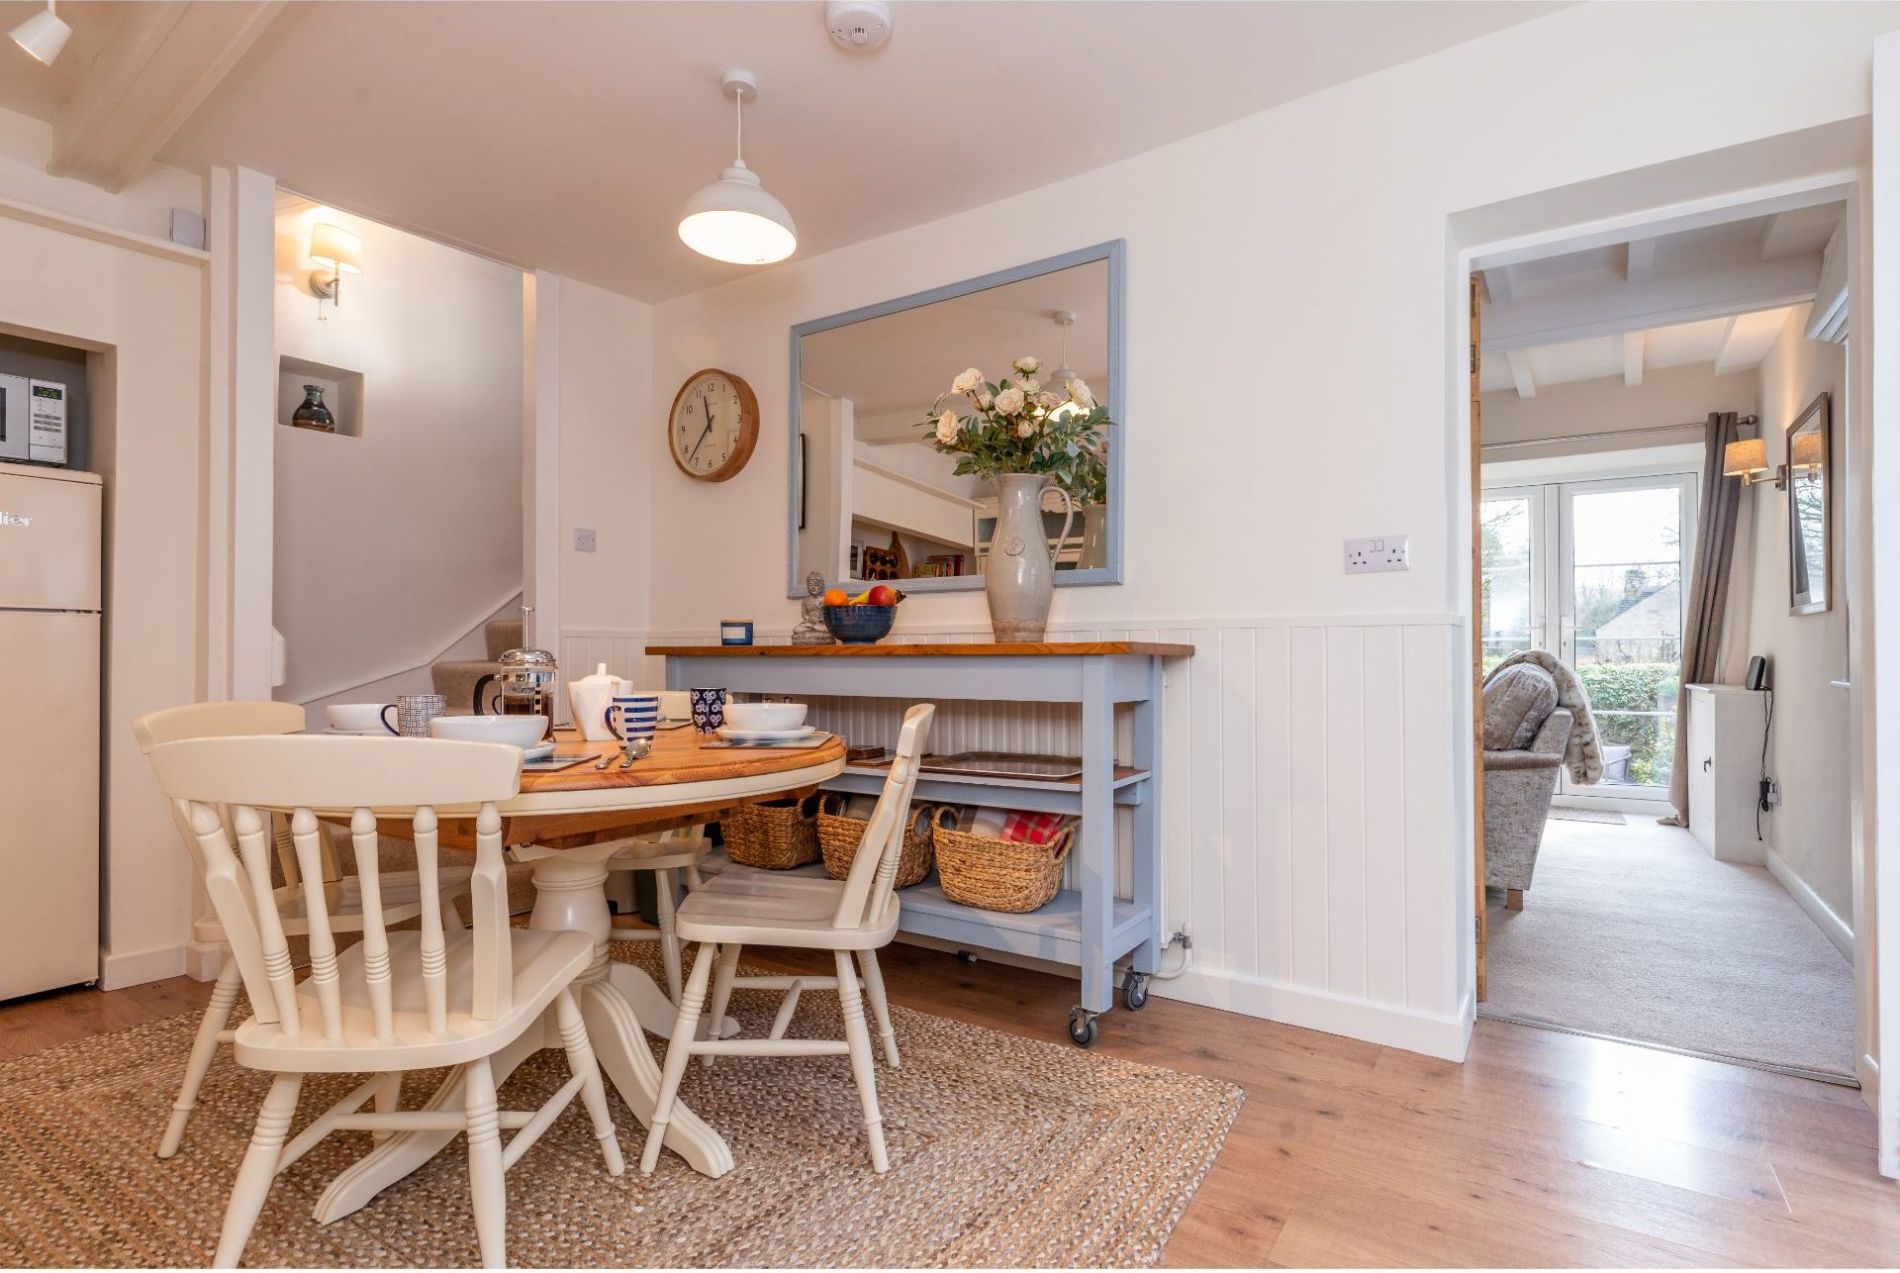 Kitchen | Baslow Holiday Cottages - Near Chatsworth House | Peak District